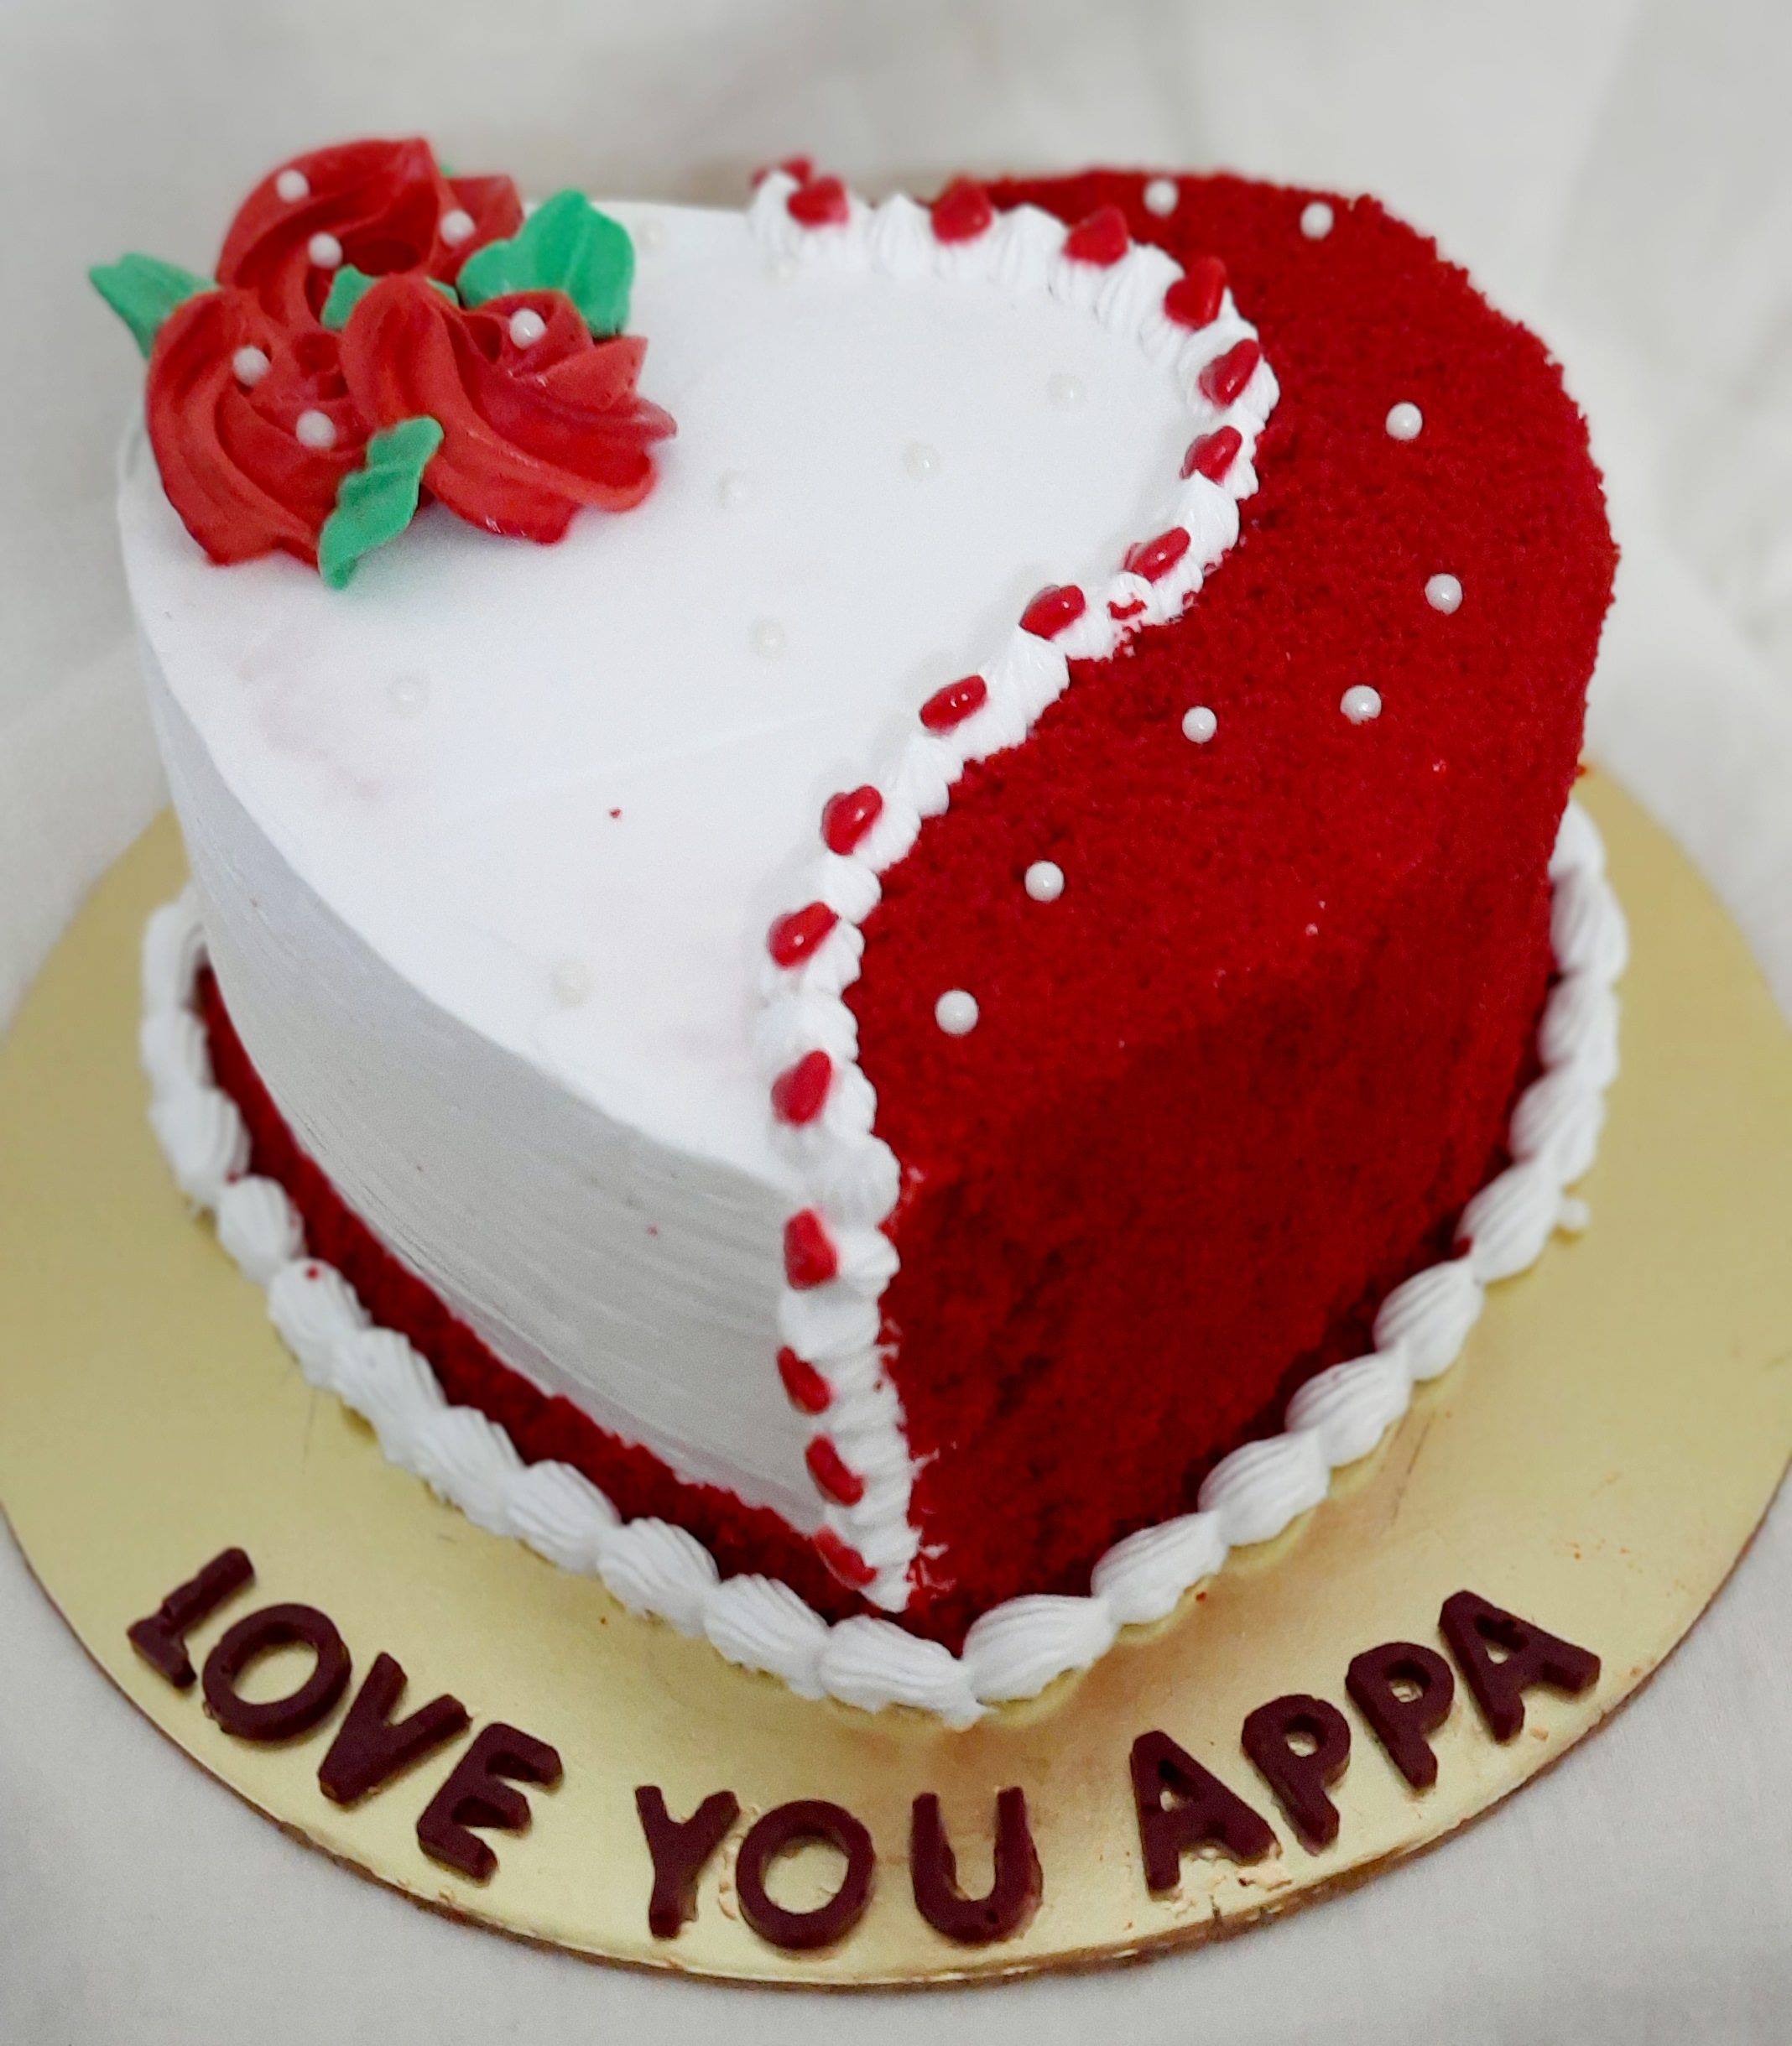 Best Red Velvet cake with cream cheese frosting In Pune | Order Online